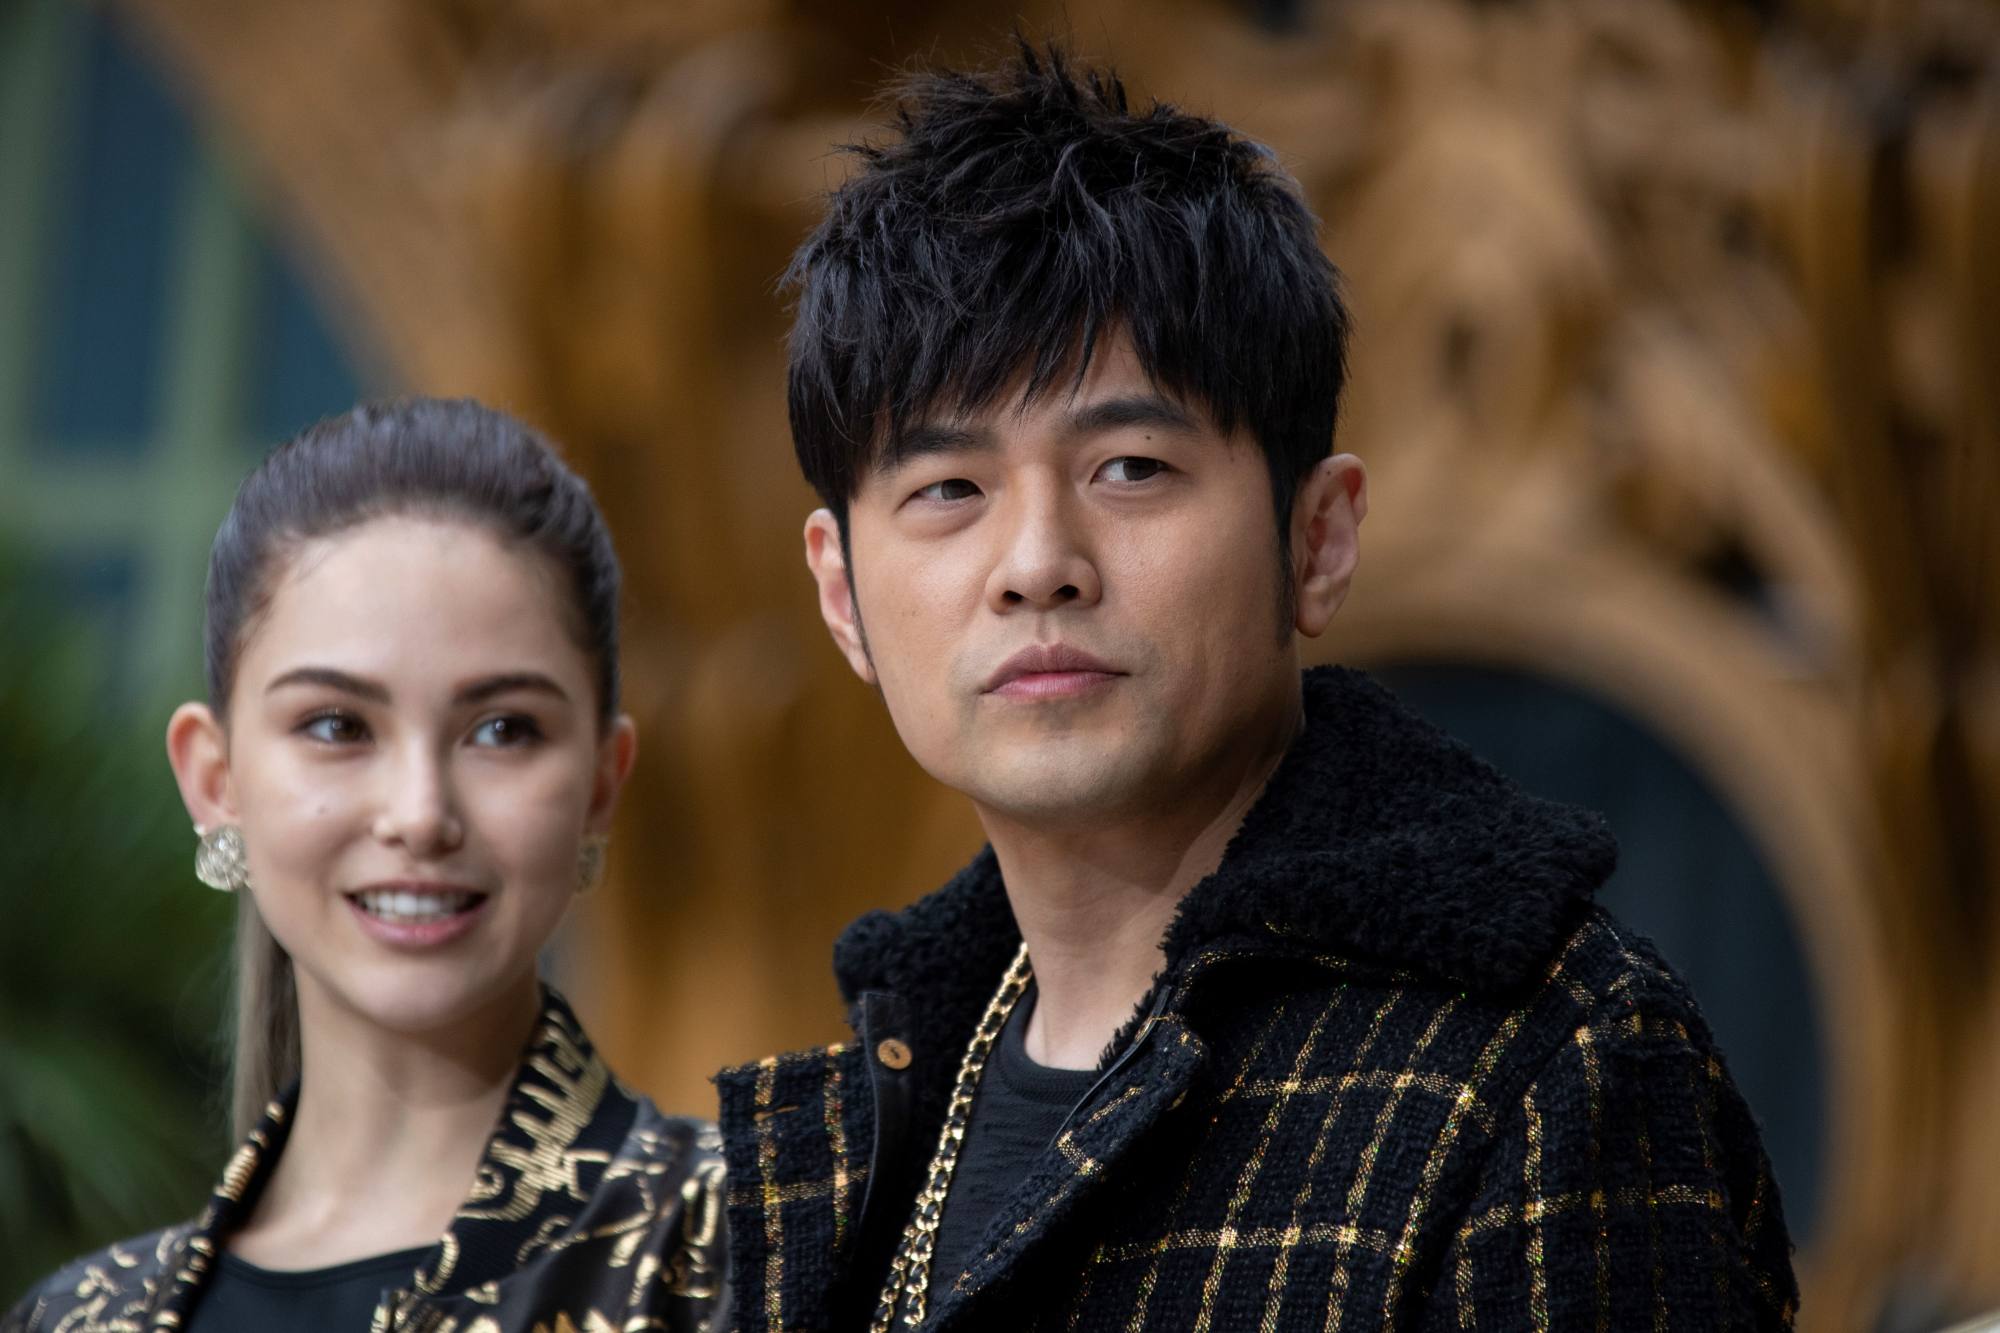 Taiwanese actress and model Hannah Quinlivan and husband, Taiwanese singer Jay Chou, pose prior to a Chanel fashion show in Paris. Chou recently appeared in two concerts on WeChat. Photo: AFP